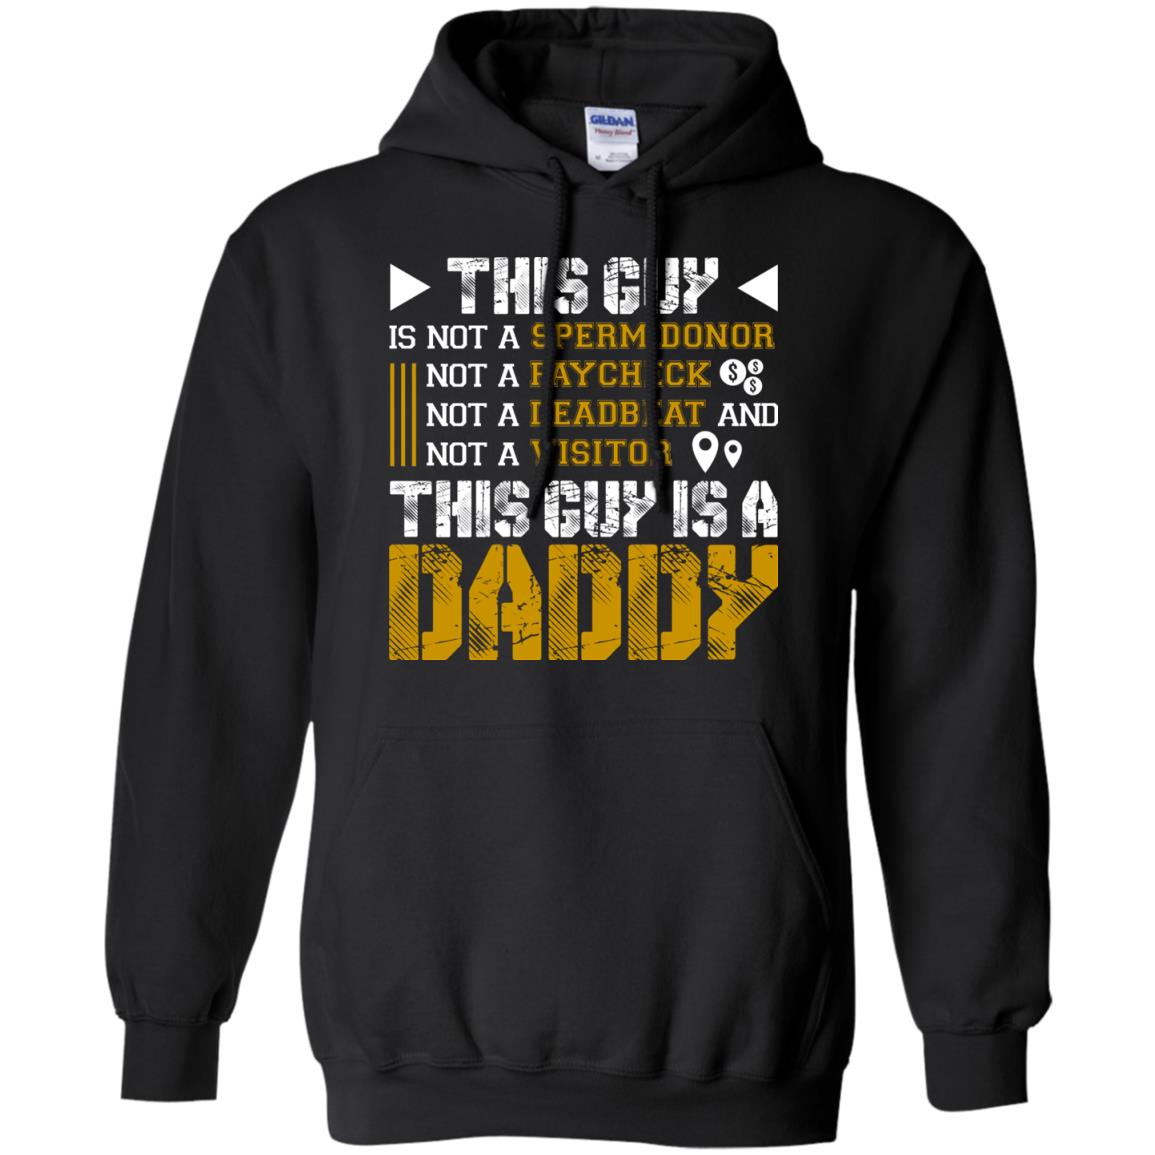 This Guy Is Not A Sperm Donor Not A Paycheck Not A Deadbeat And Not A Visitor This Guy Is A DaddyG185 Gildan Pullover Hoodie 8 oz.